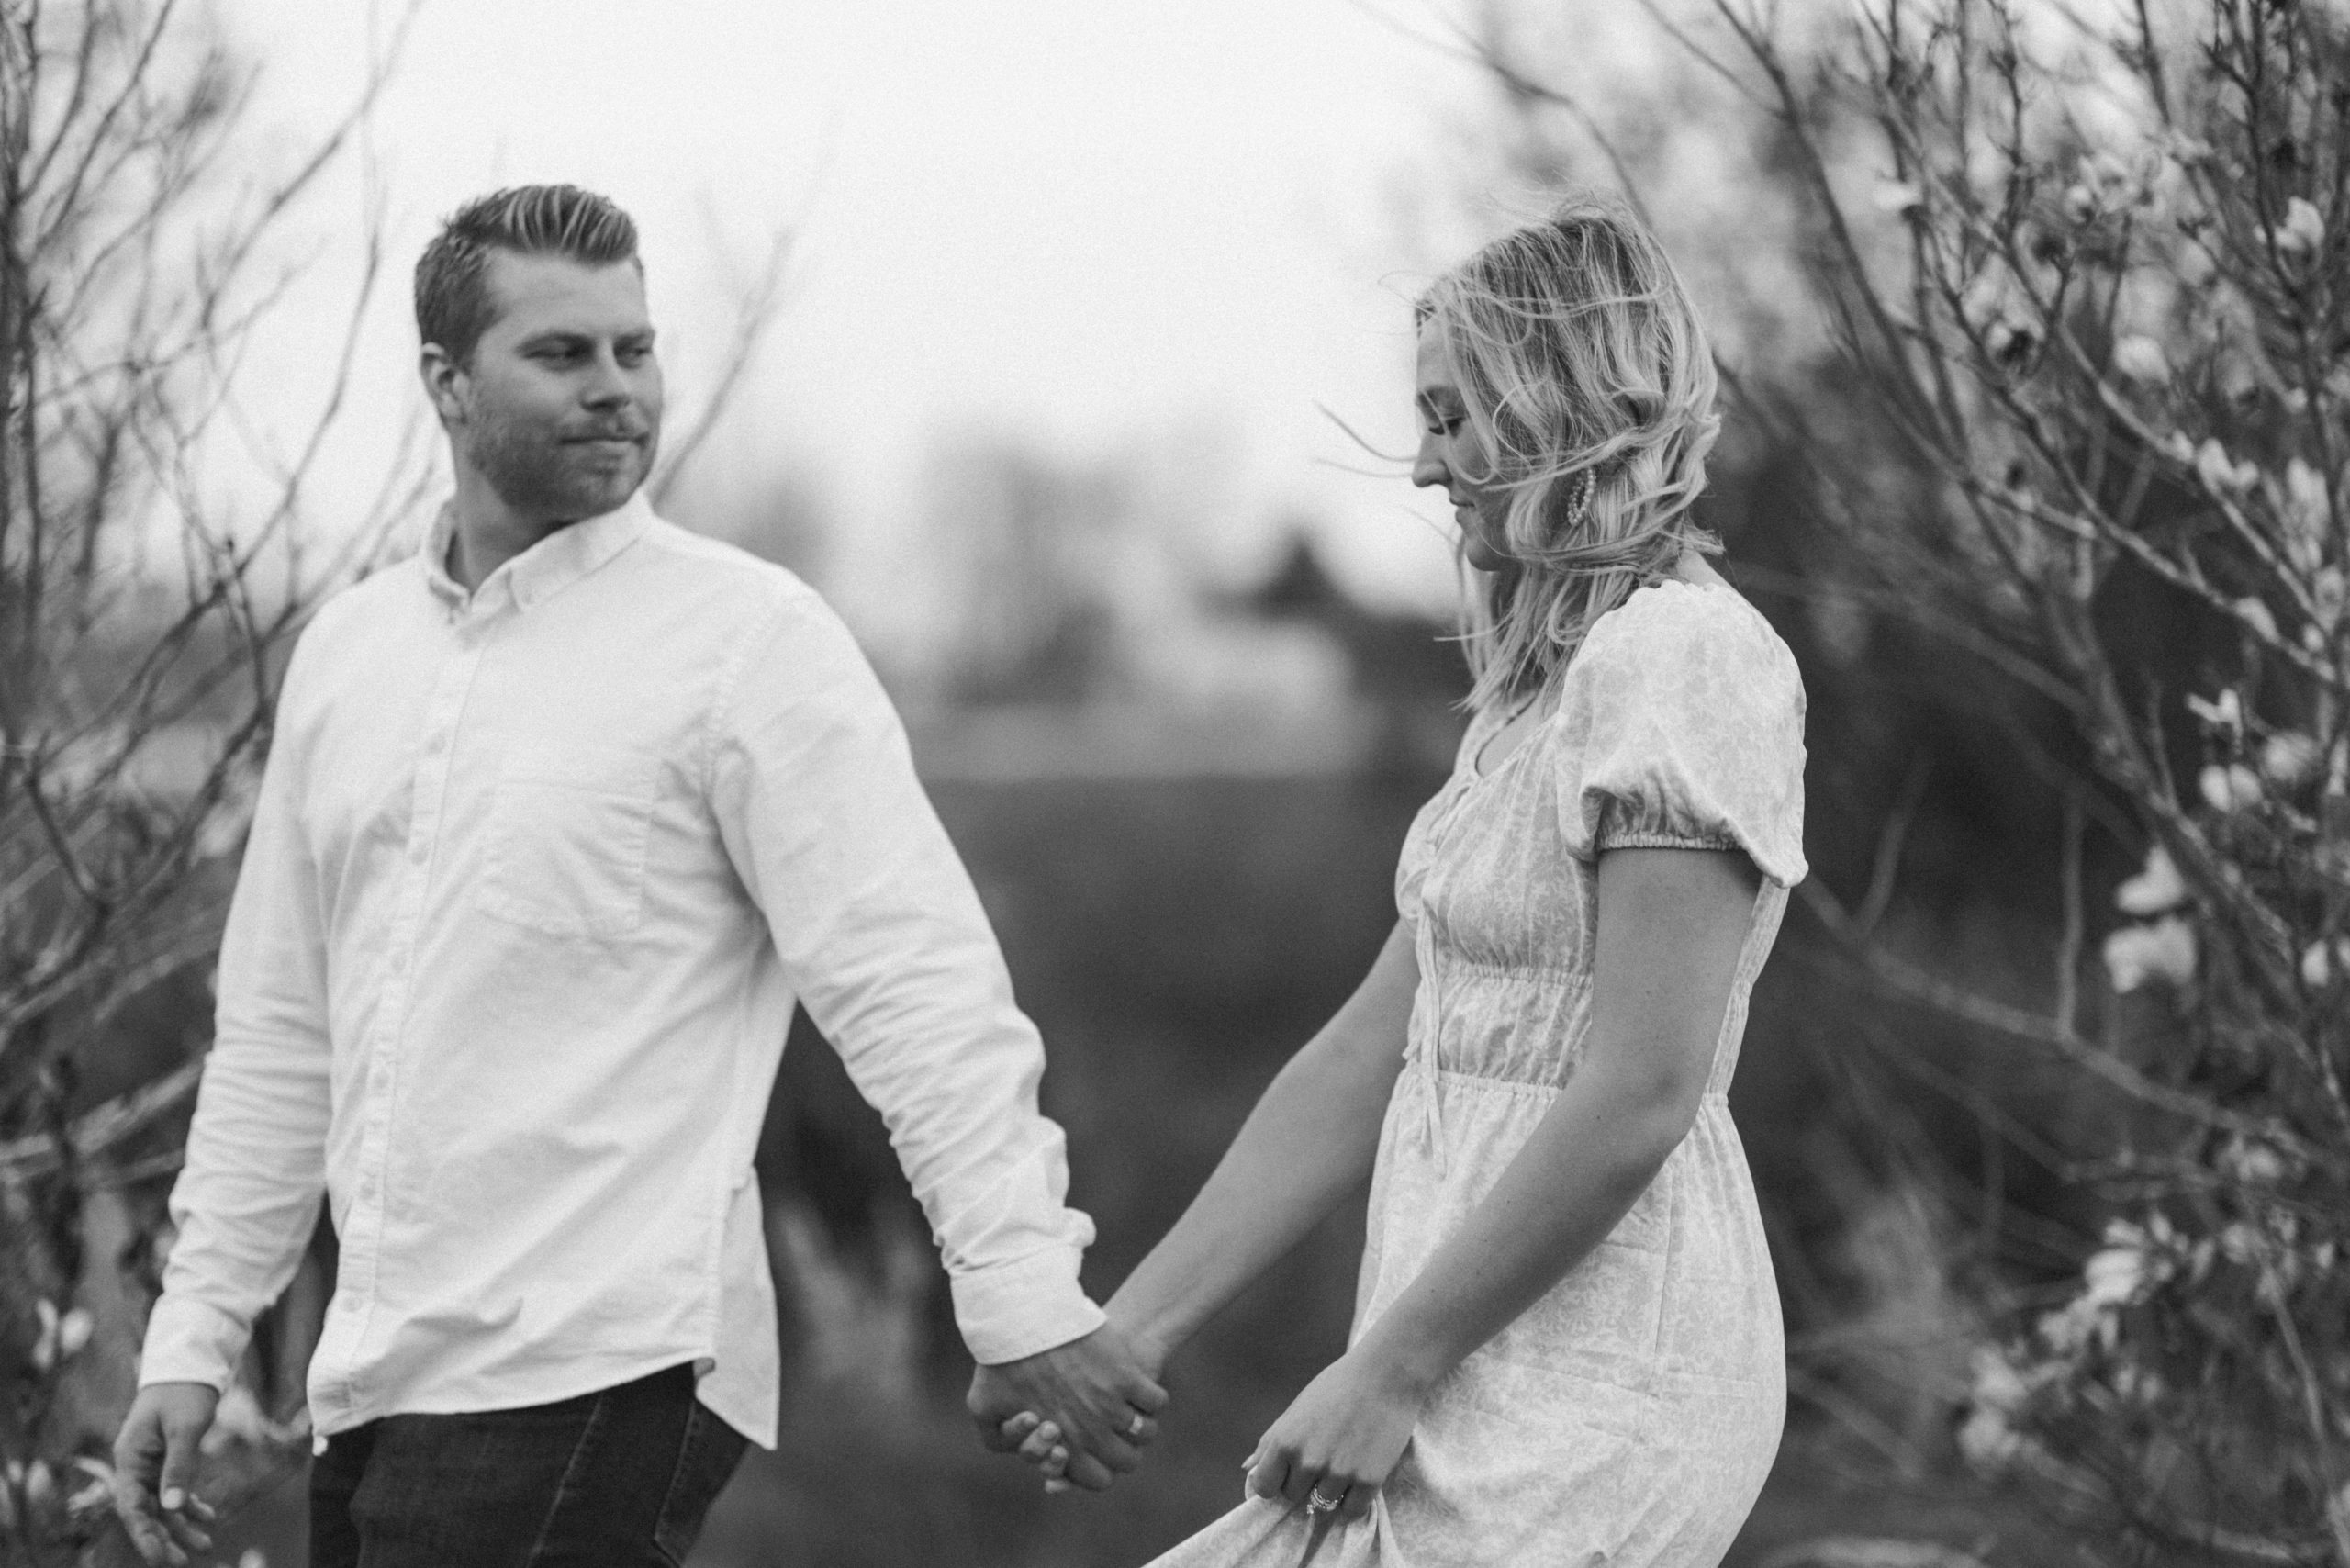 Black and white photo of guy looking back at his fiance as they walk together for their spring engagement photos